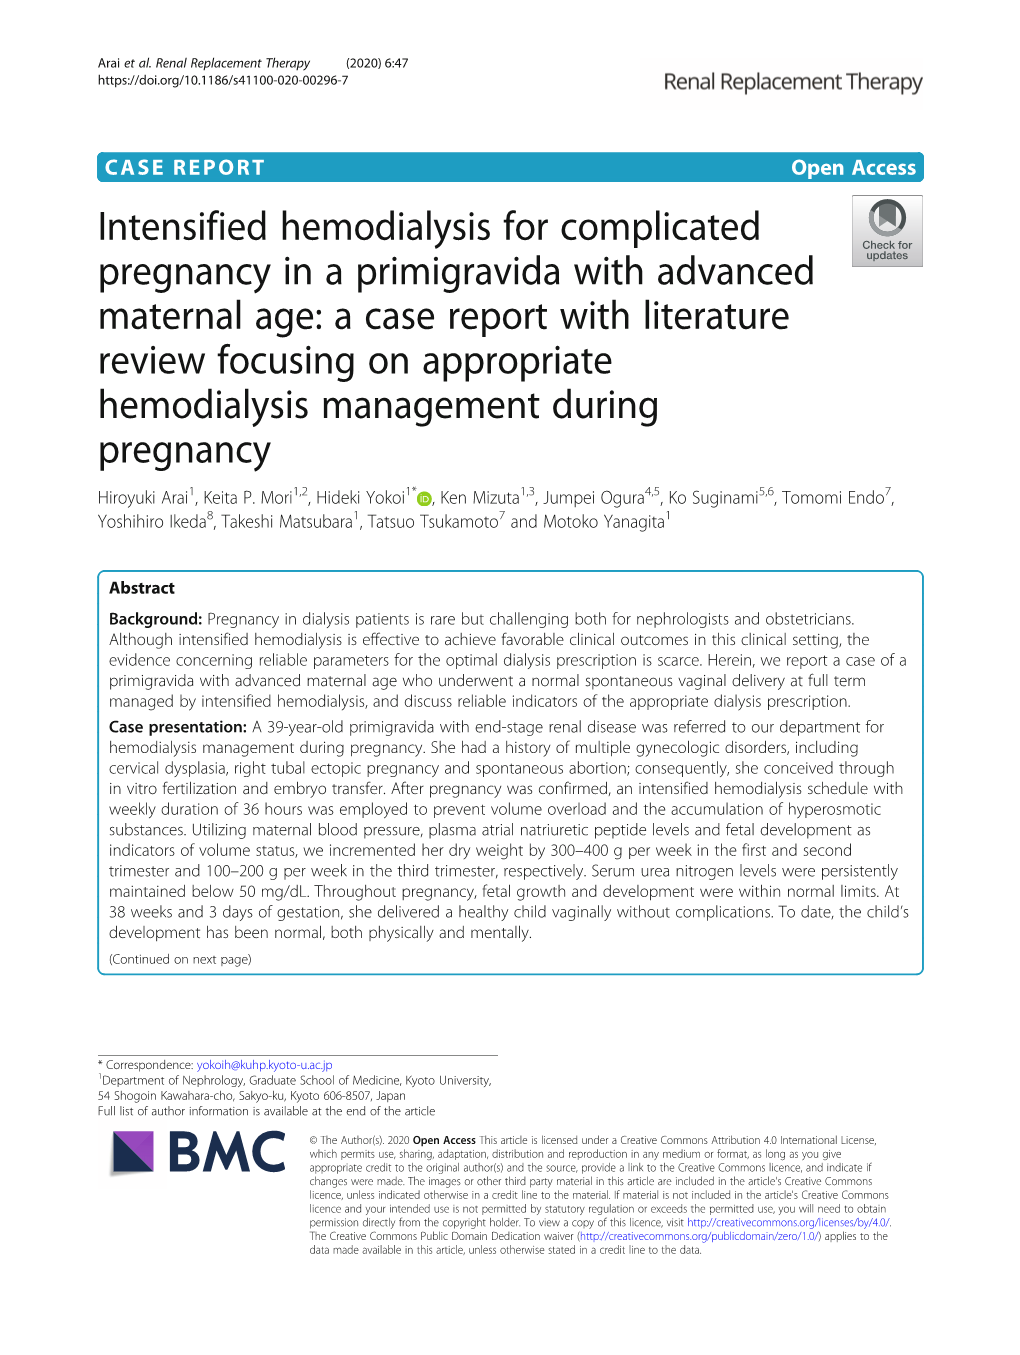 Intensified Hemodialysis for Complicated Pregnancy in A